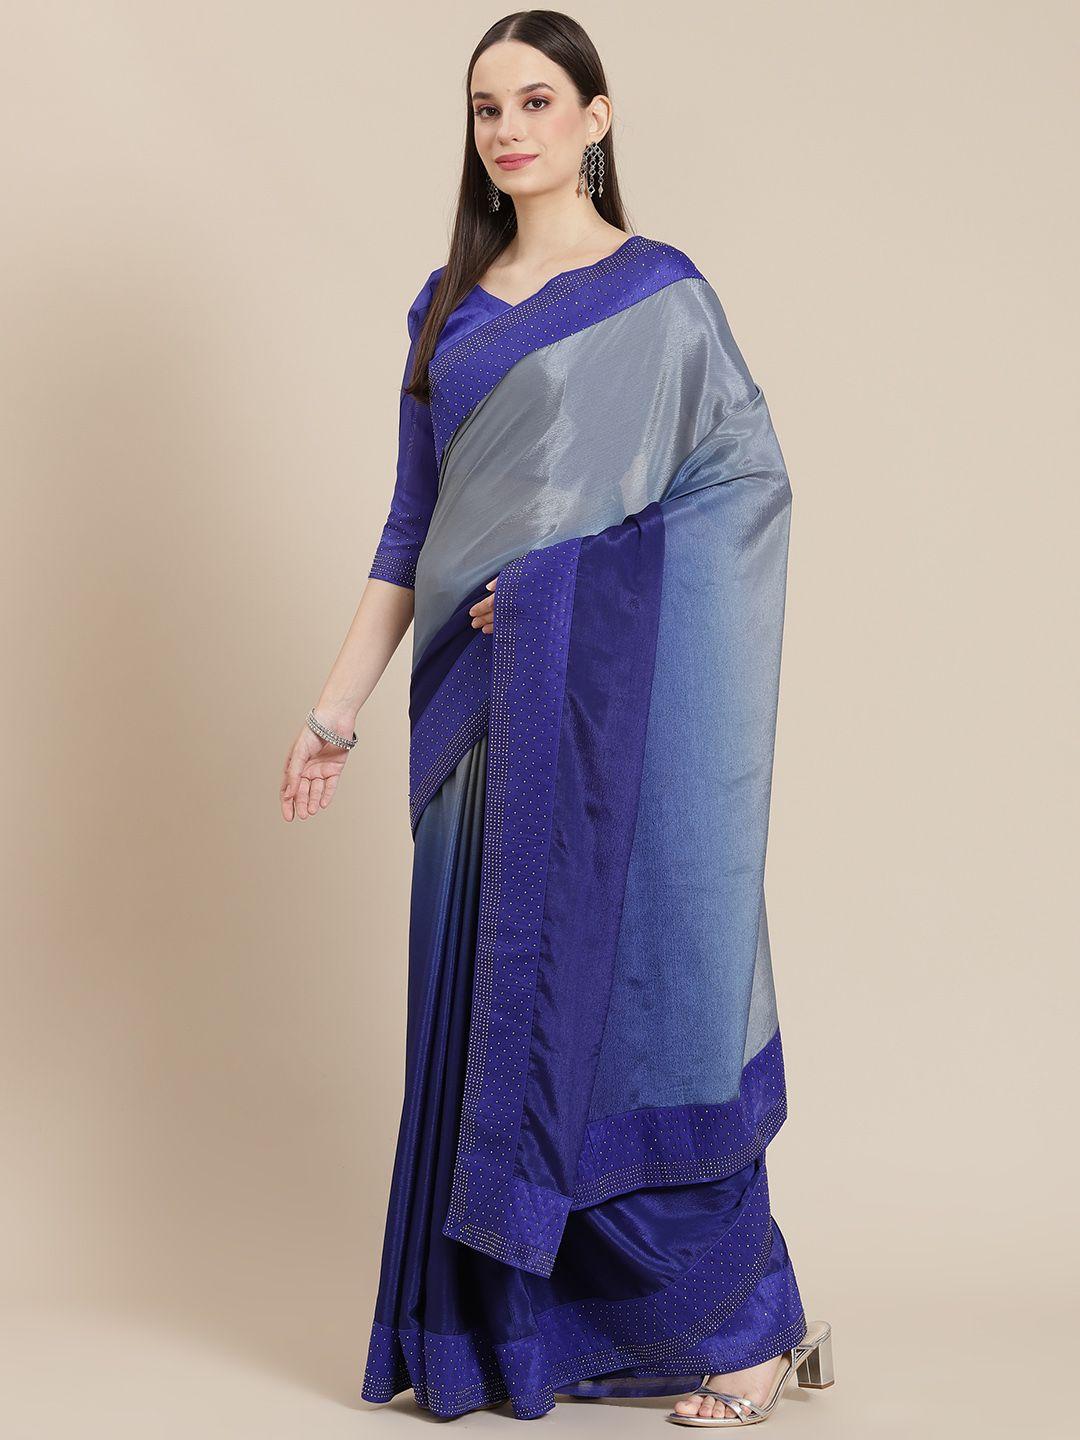 Mitera Blue & Grey Ombre Dyed Saree with Embellished Border